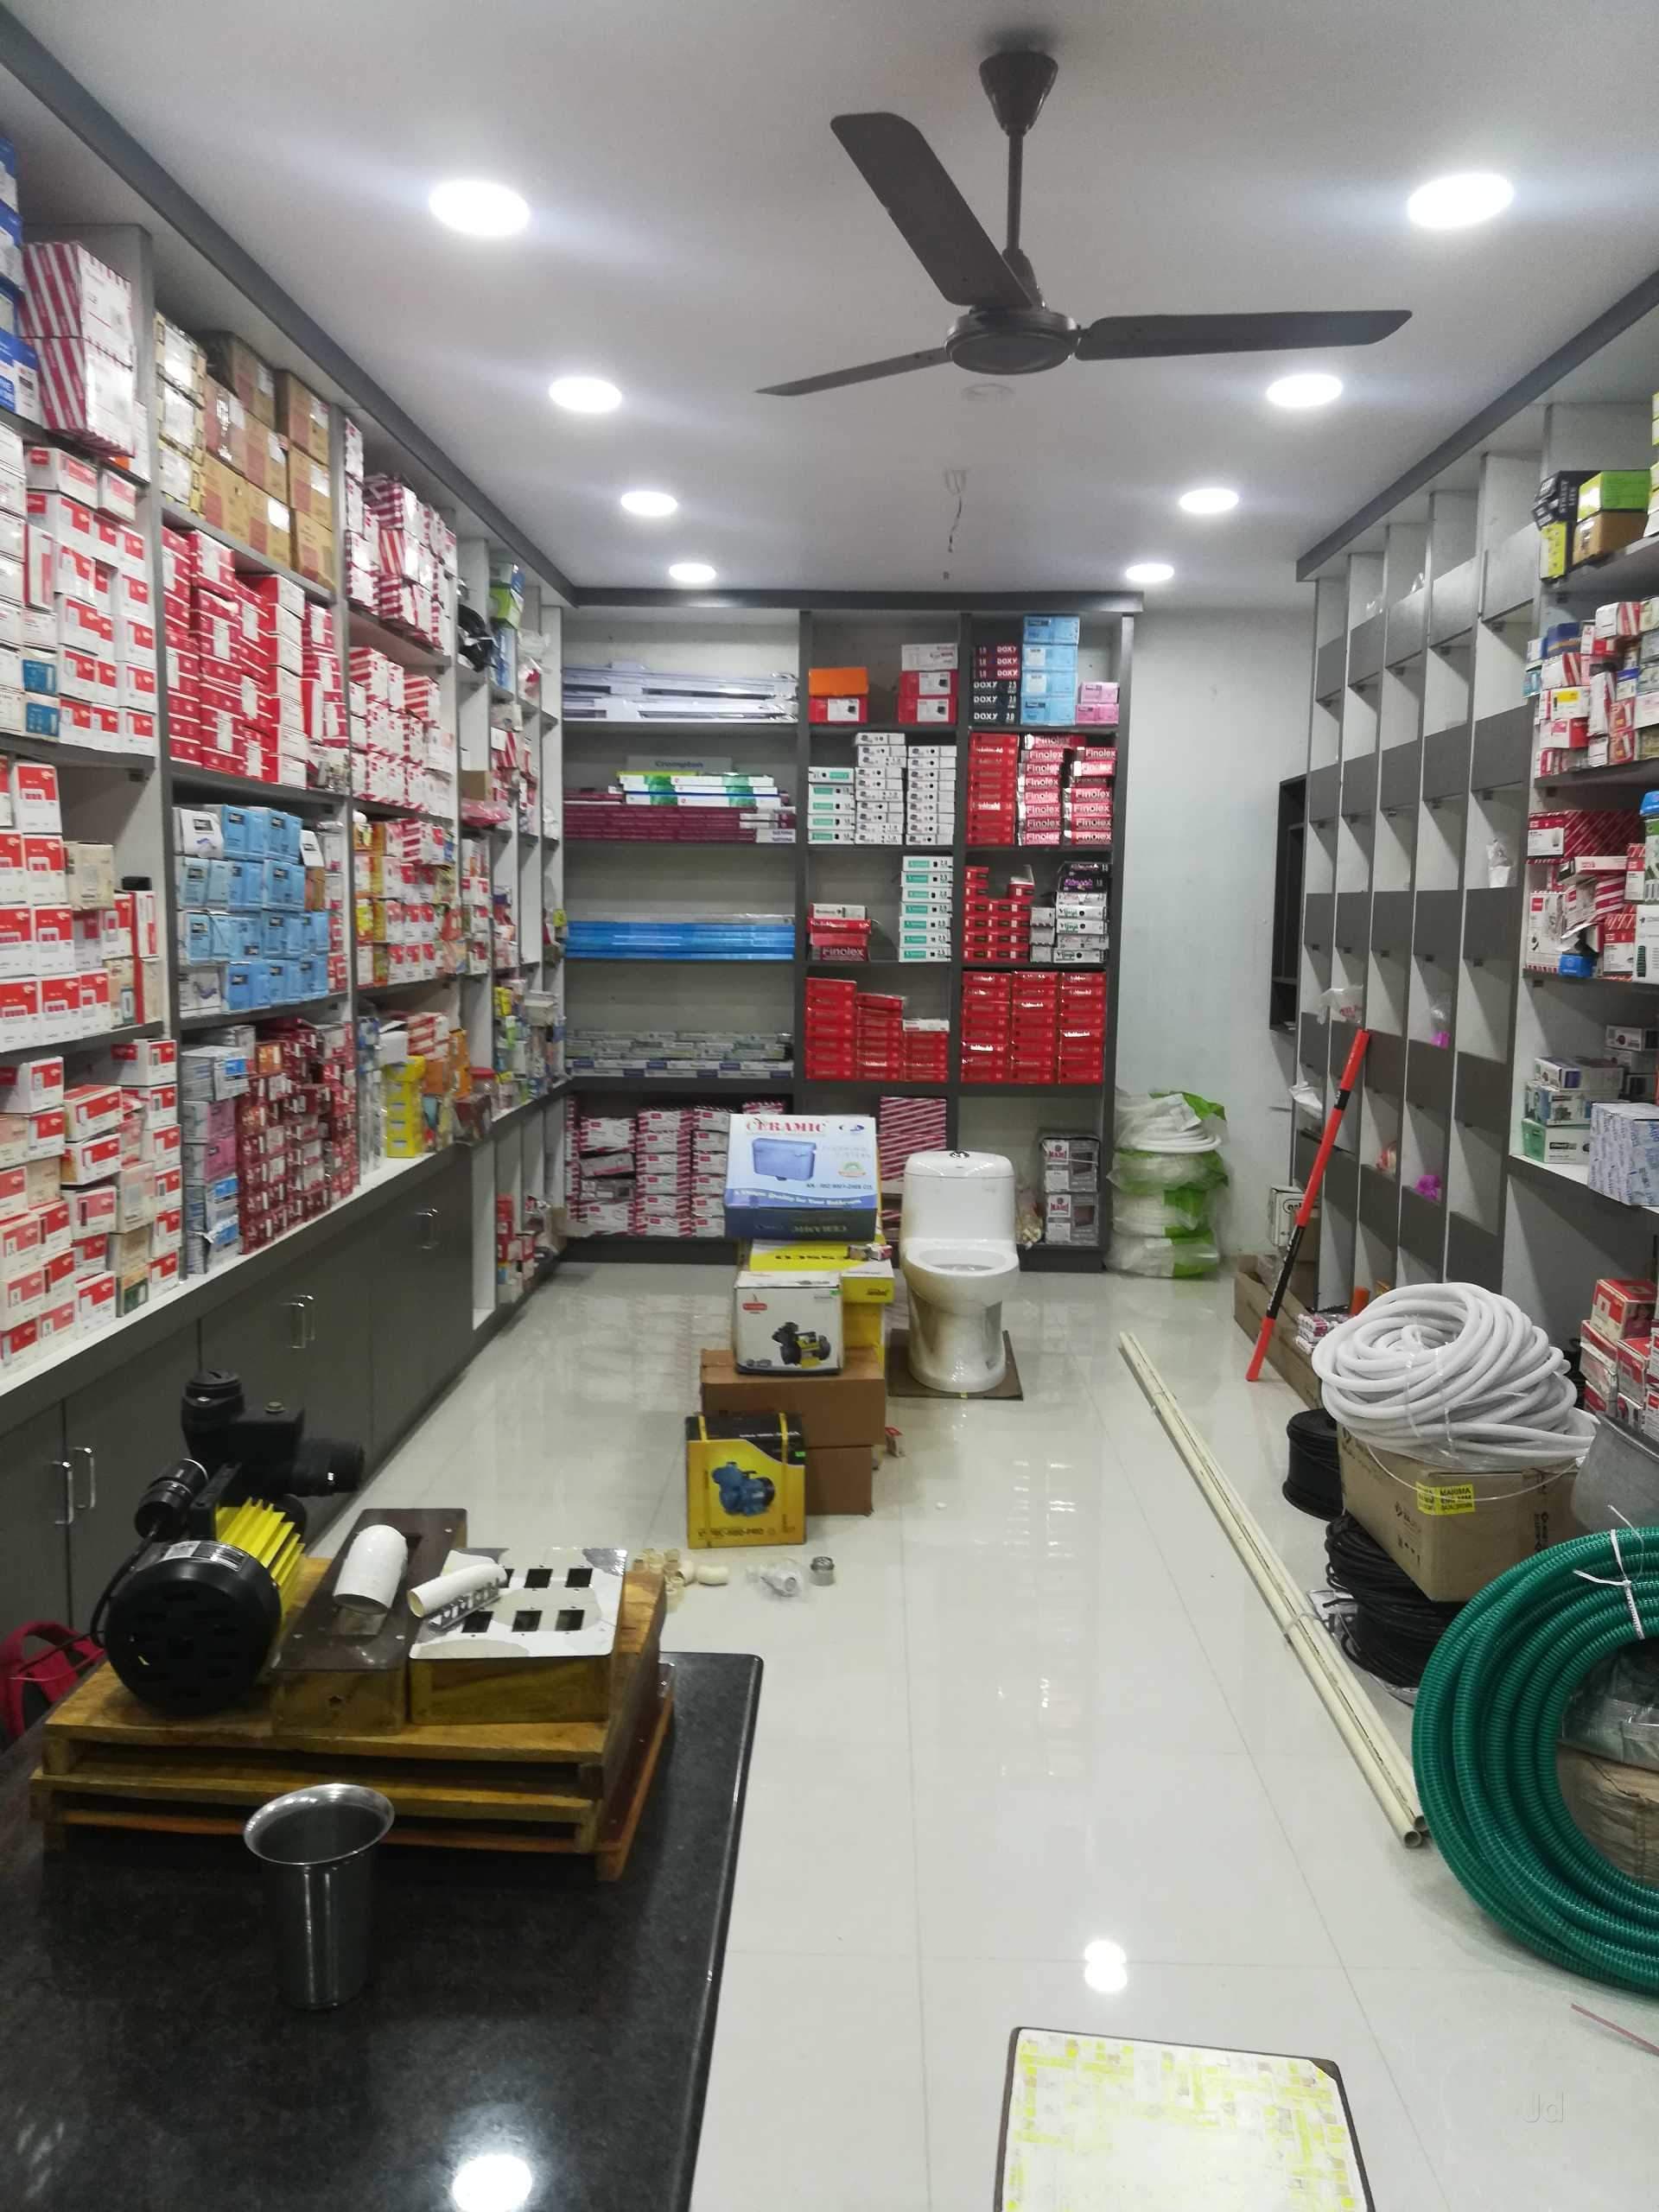 Electrical Shop